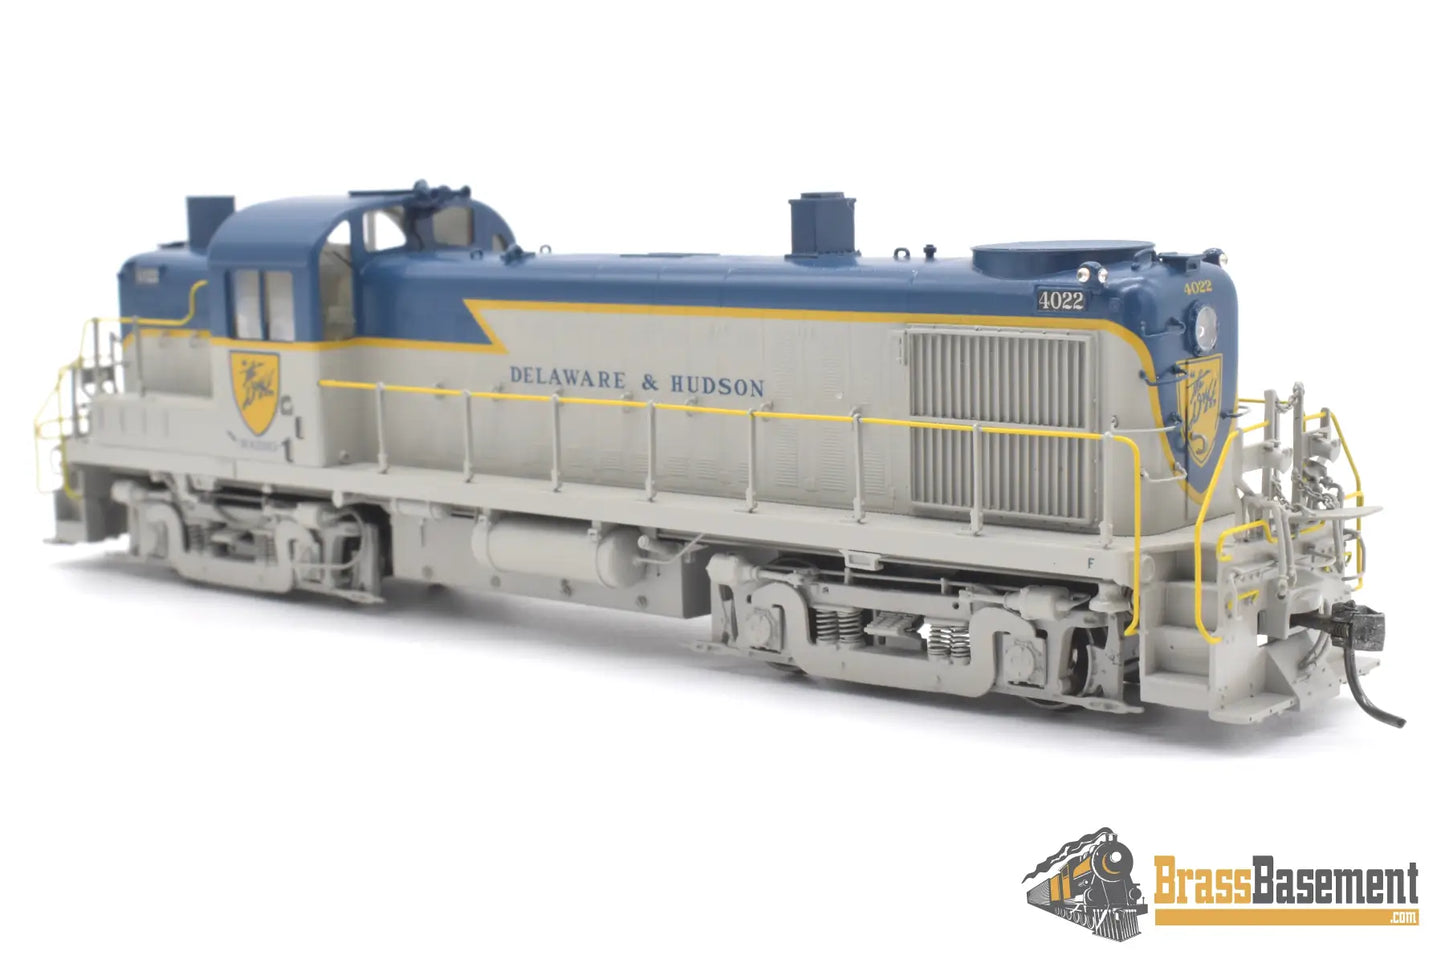 Ho Brass - Dp - 9323.1 Division Point Delaware & Hudson Rs - 2 #4022 Factory Paint Diesel